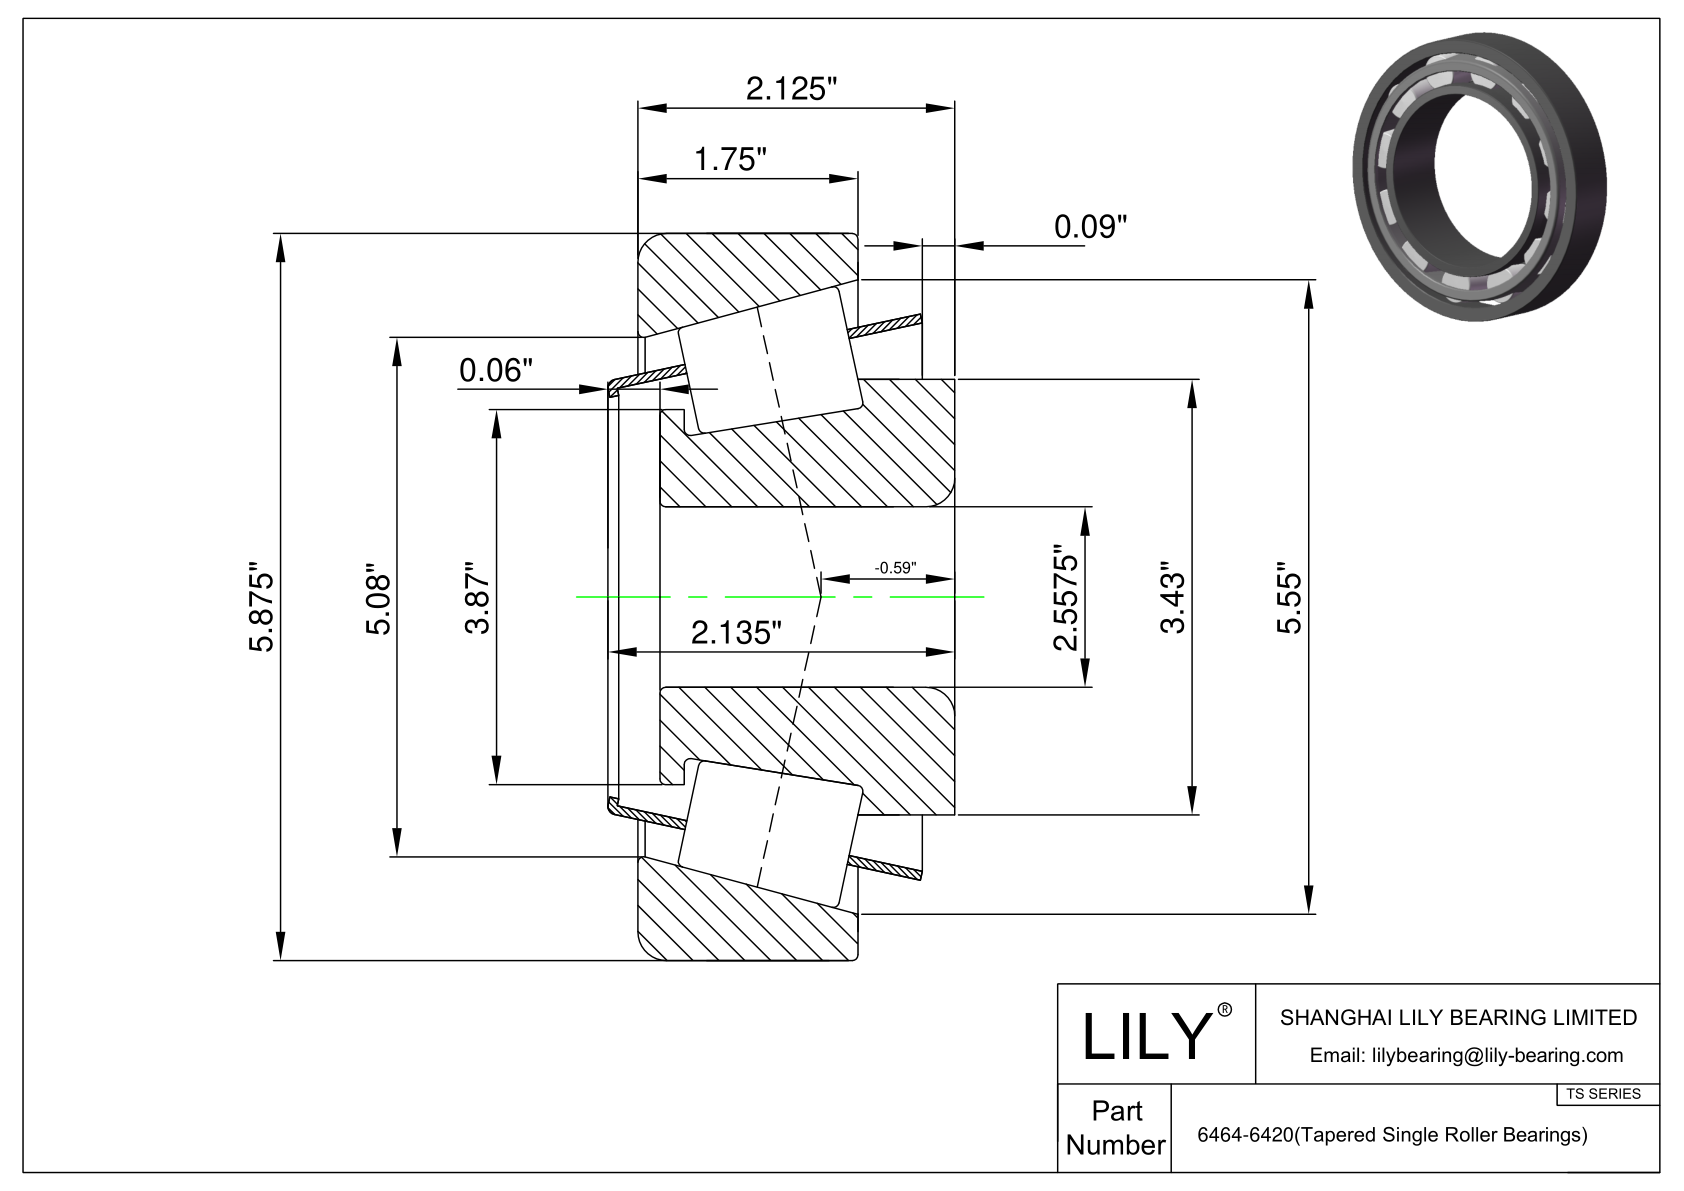 6464-6420 TS (Tapered Single Roller Bearings) (Imperial) cad drawing